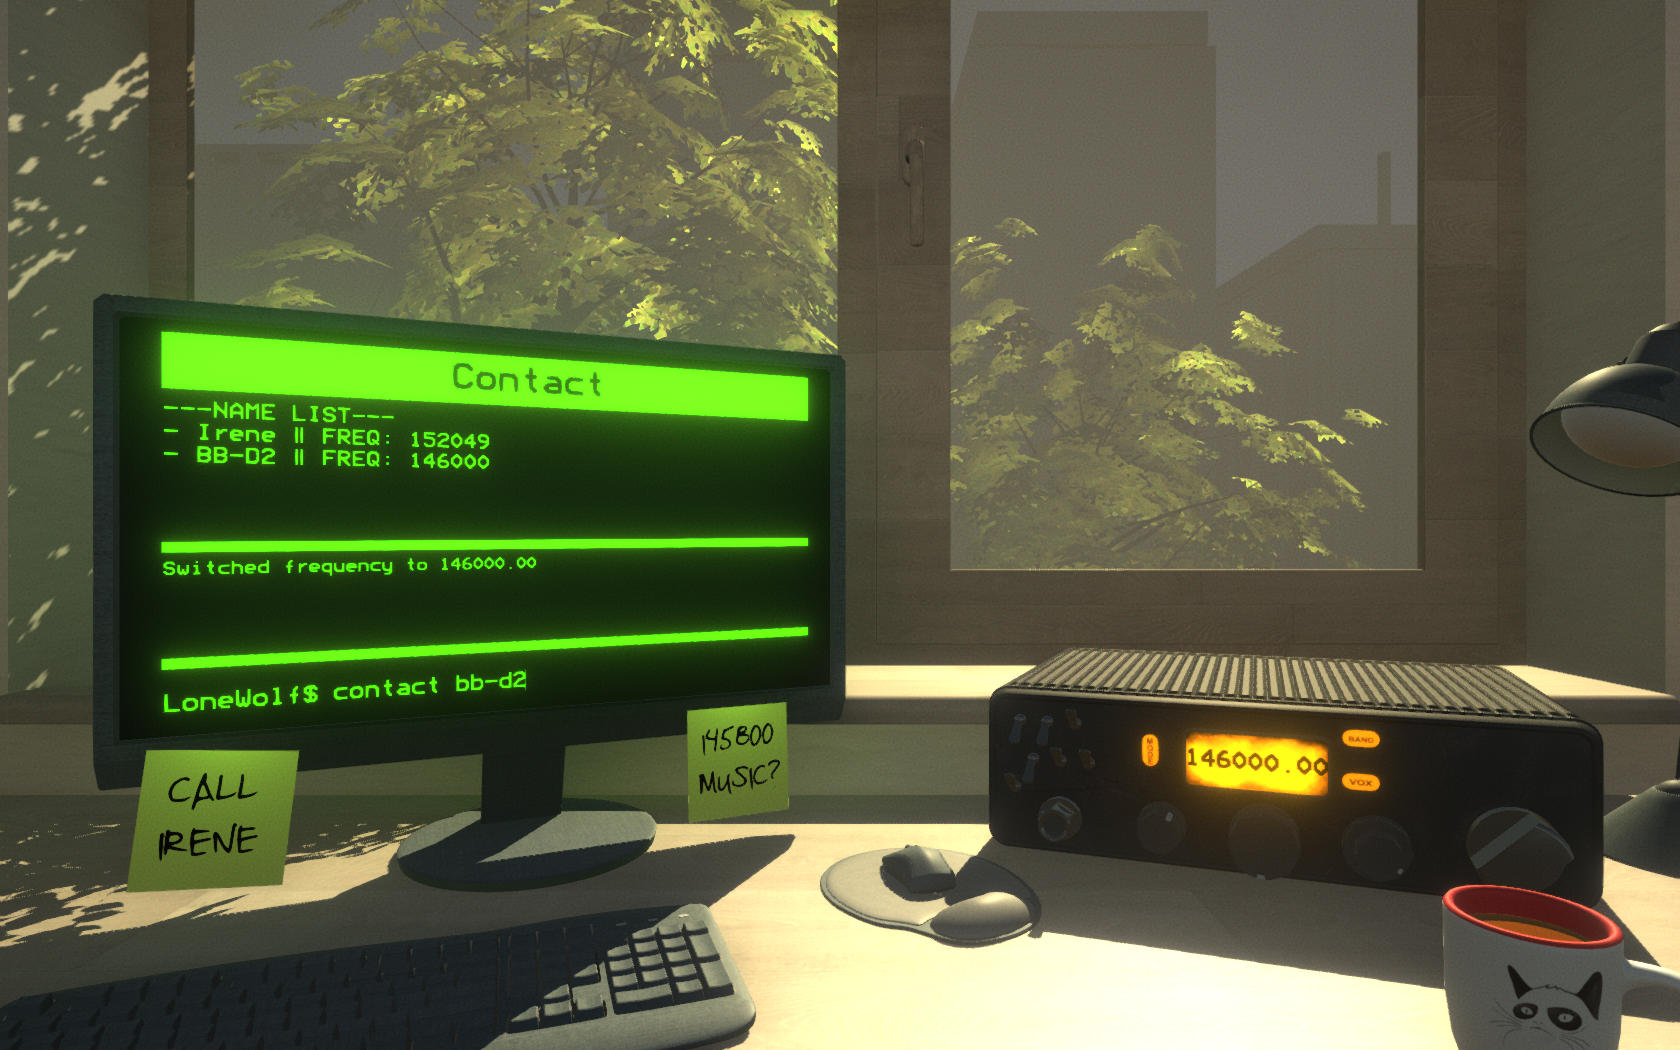 Screenshot showing the virtual computer with the text interface through which you play the game.